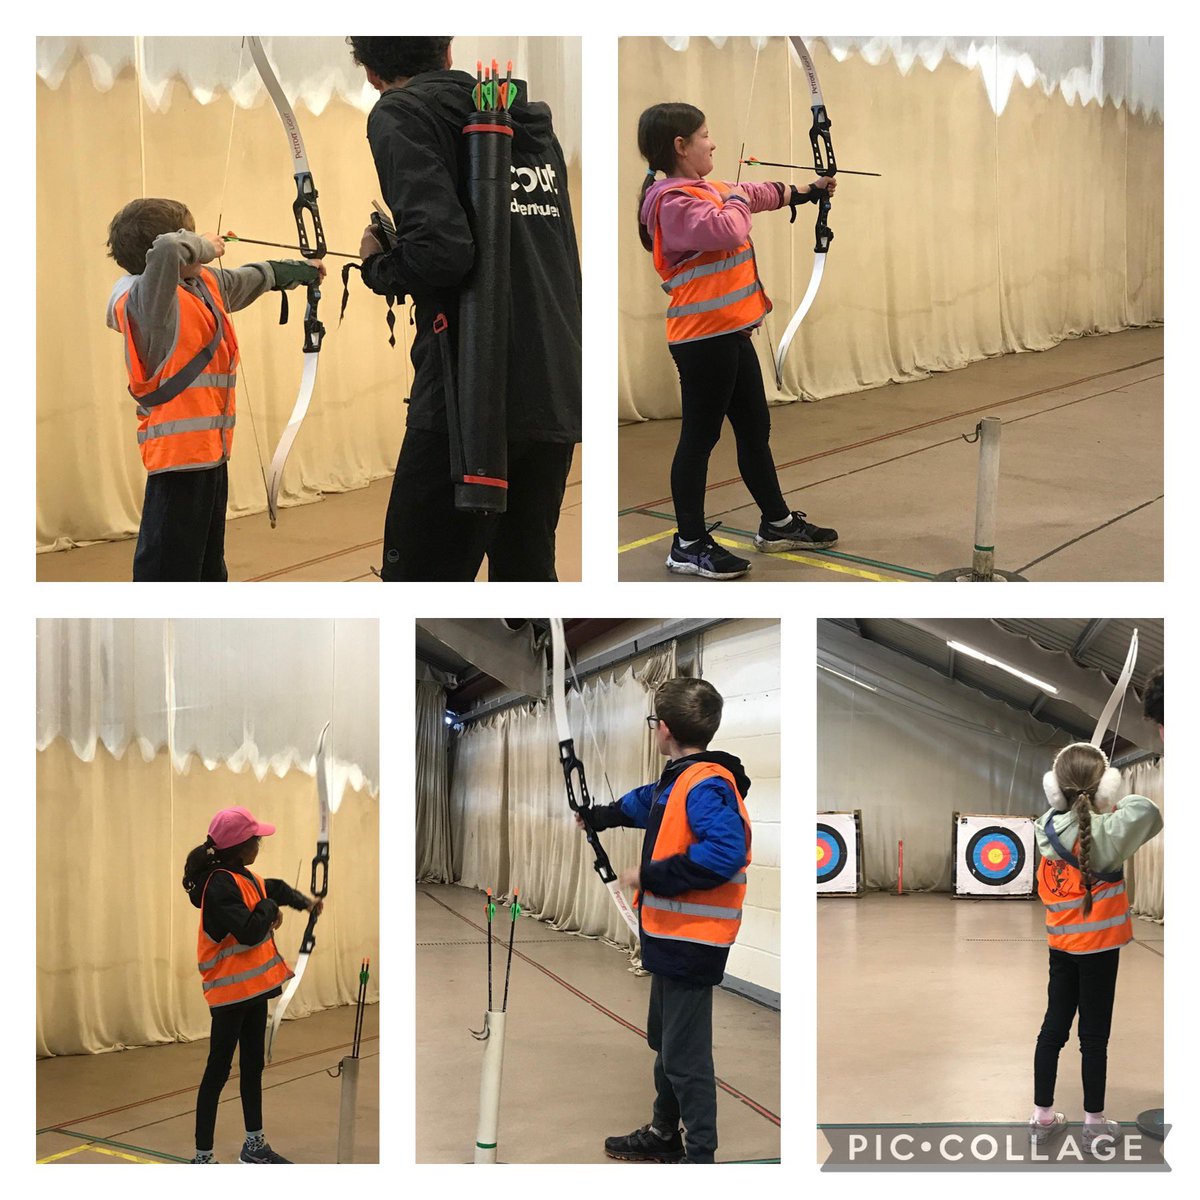 More photos from the fun @scoutadventures for Y4, indoor archery, outdoor climbing and crate stacking.